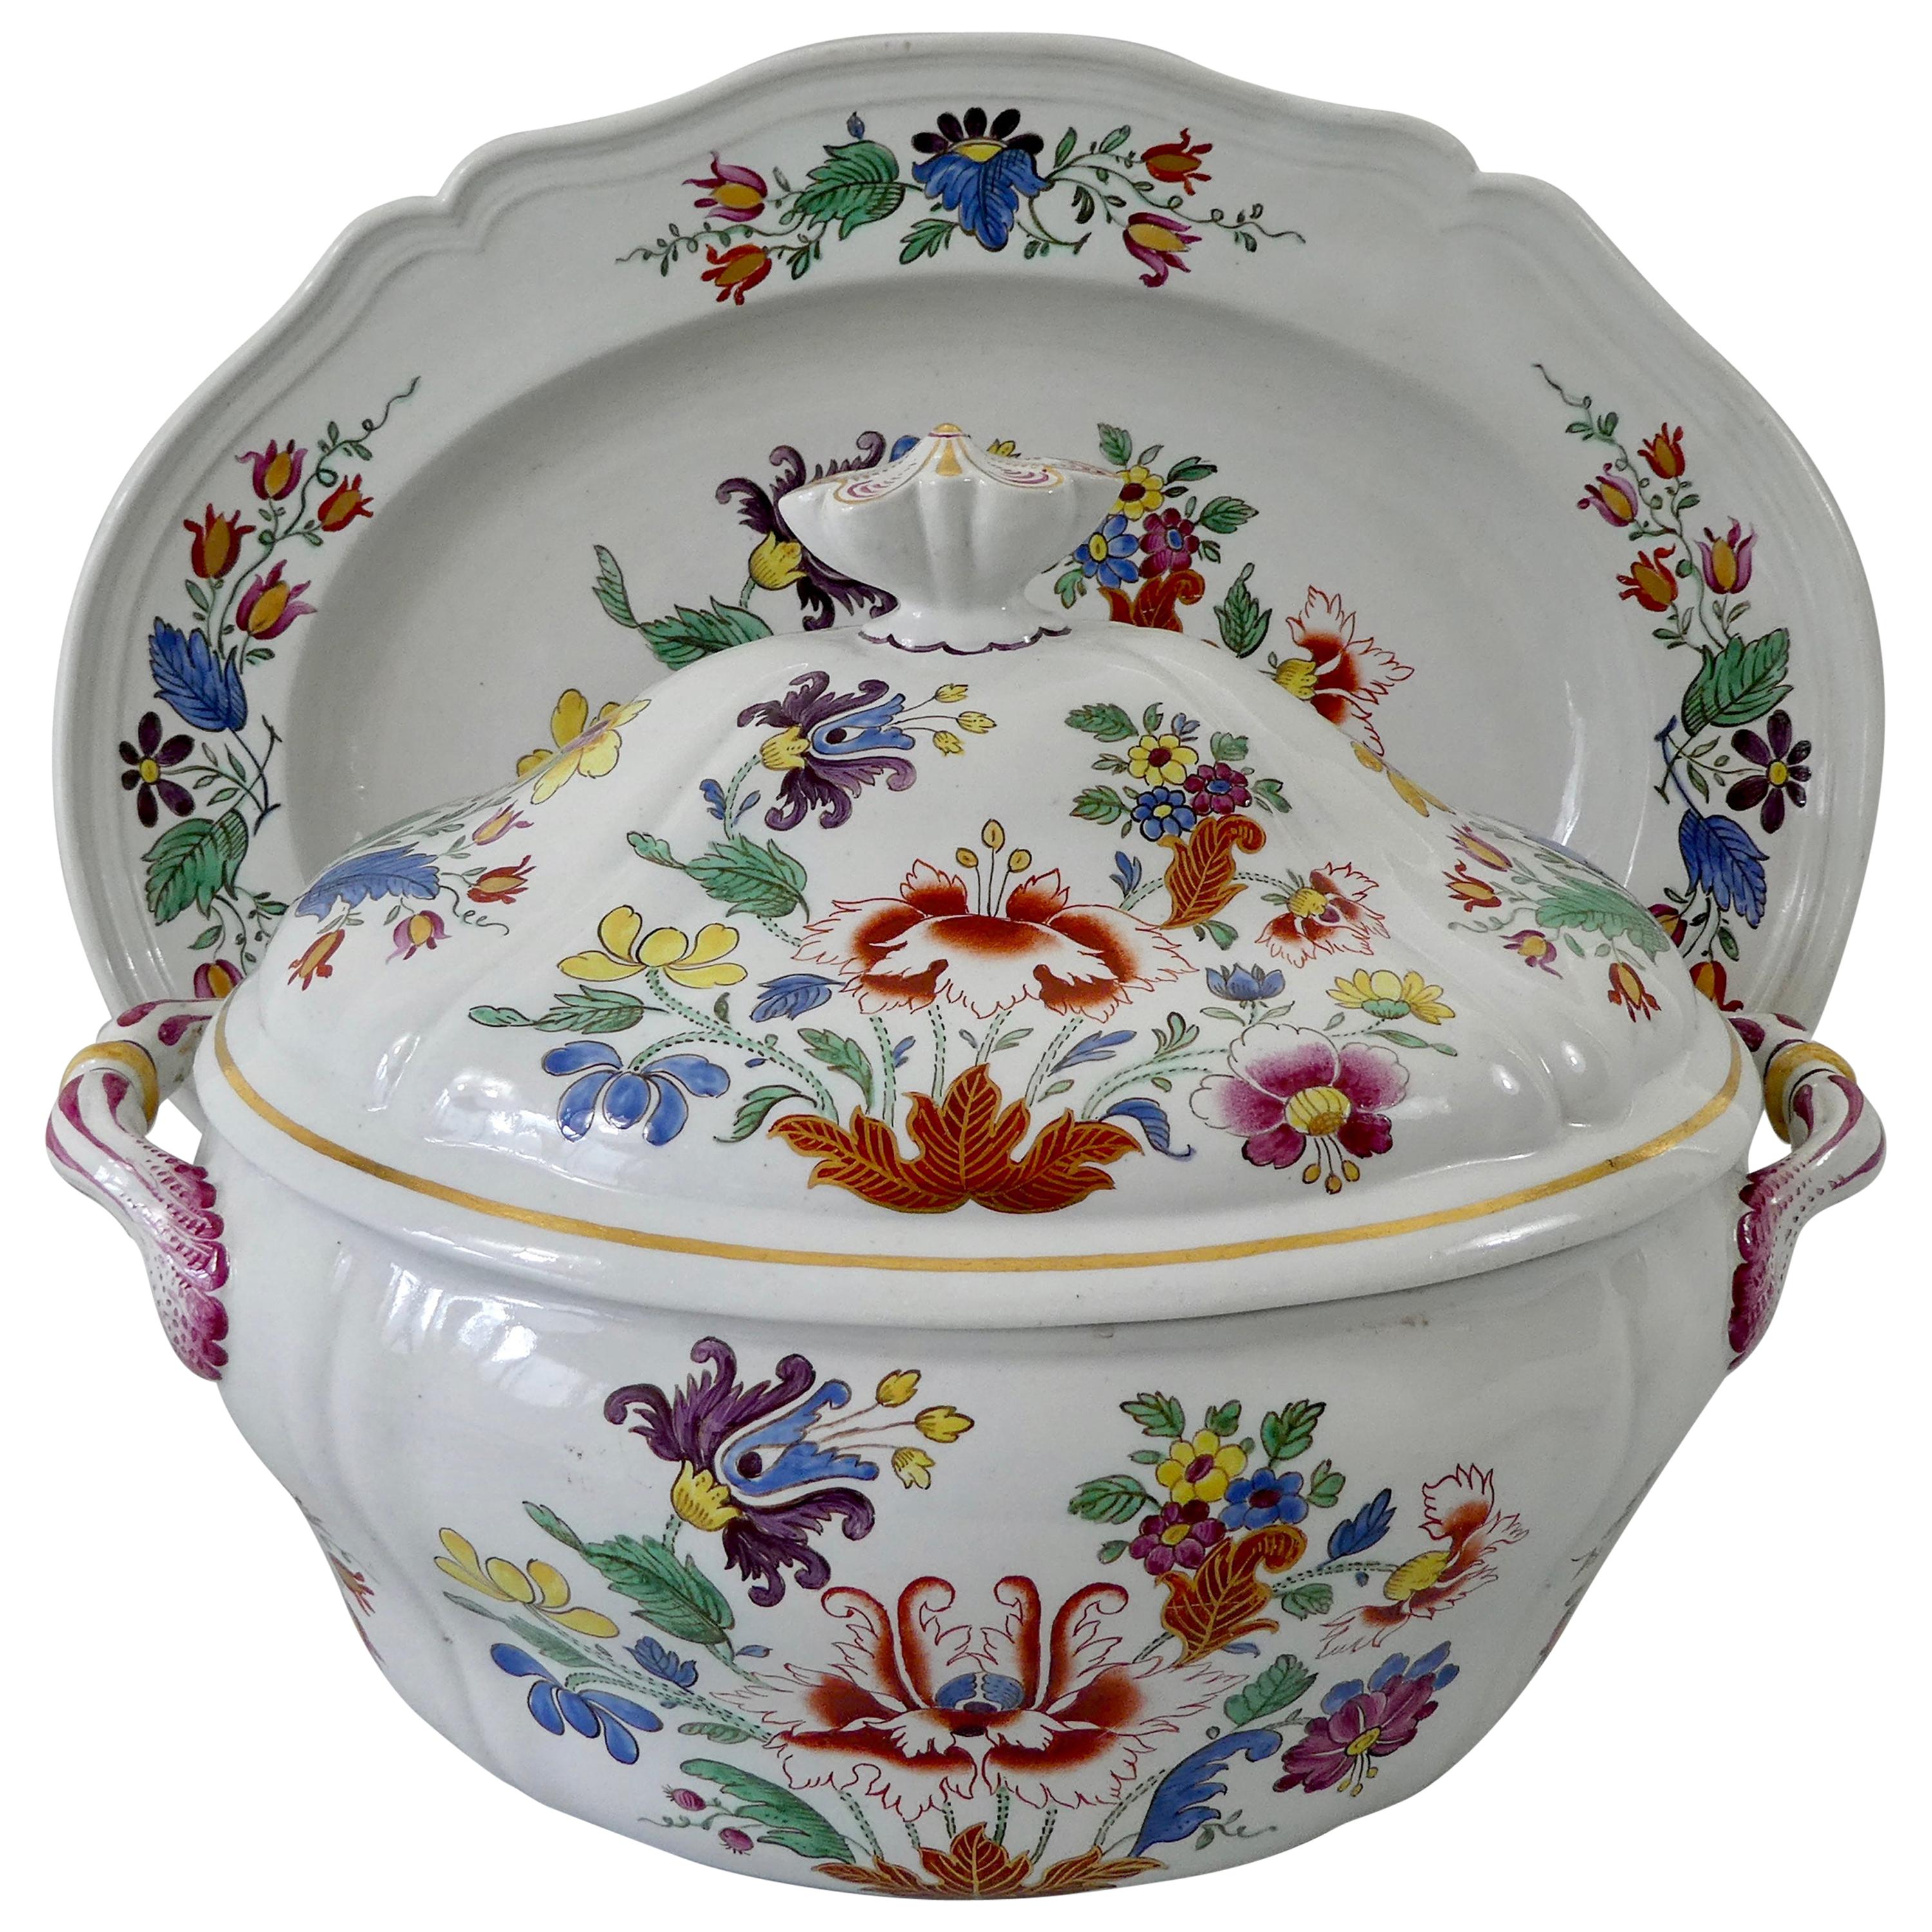 Doccia Porcelain Tureen, Cover and Stand, Tulipano Pattern, circa 1770